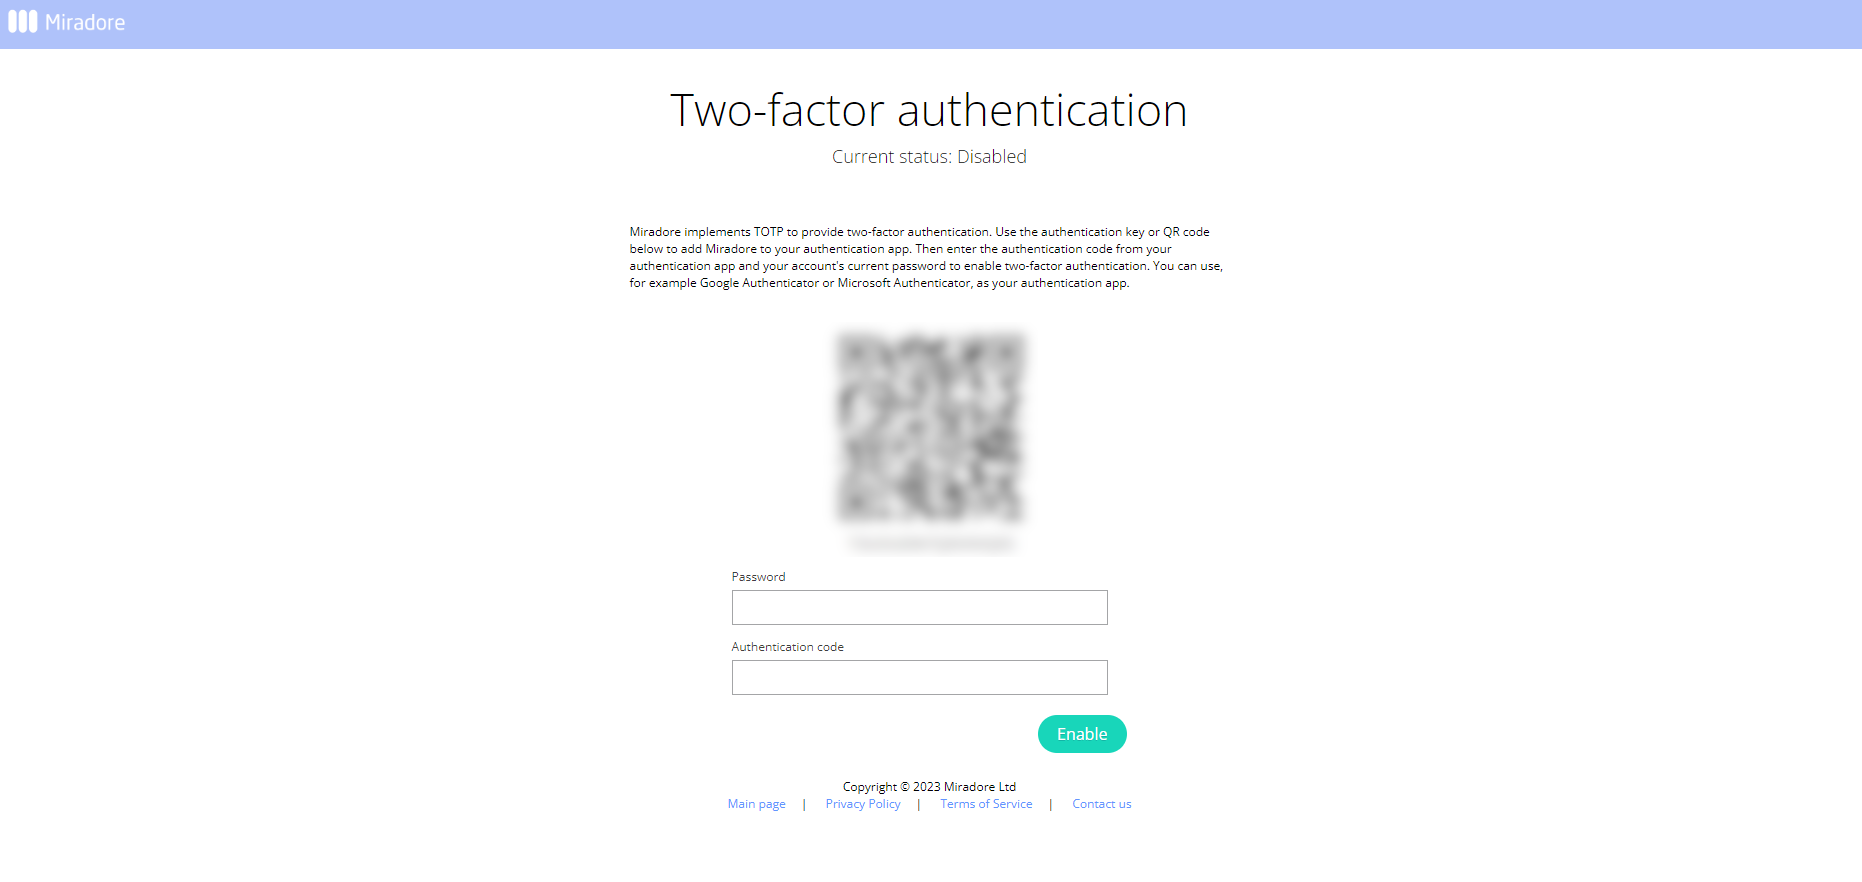 Miradore - two factor authentication current status disabled blurred